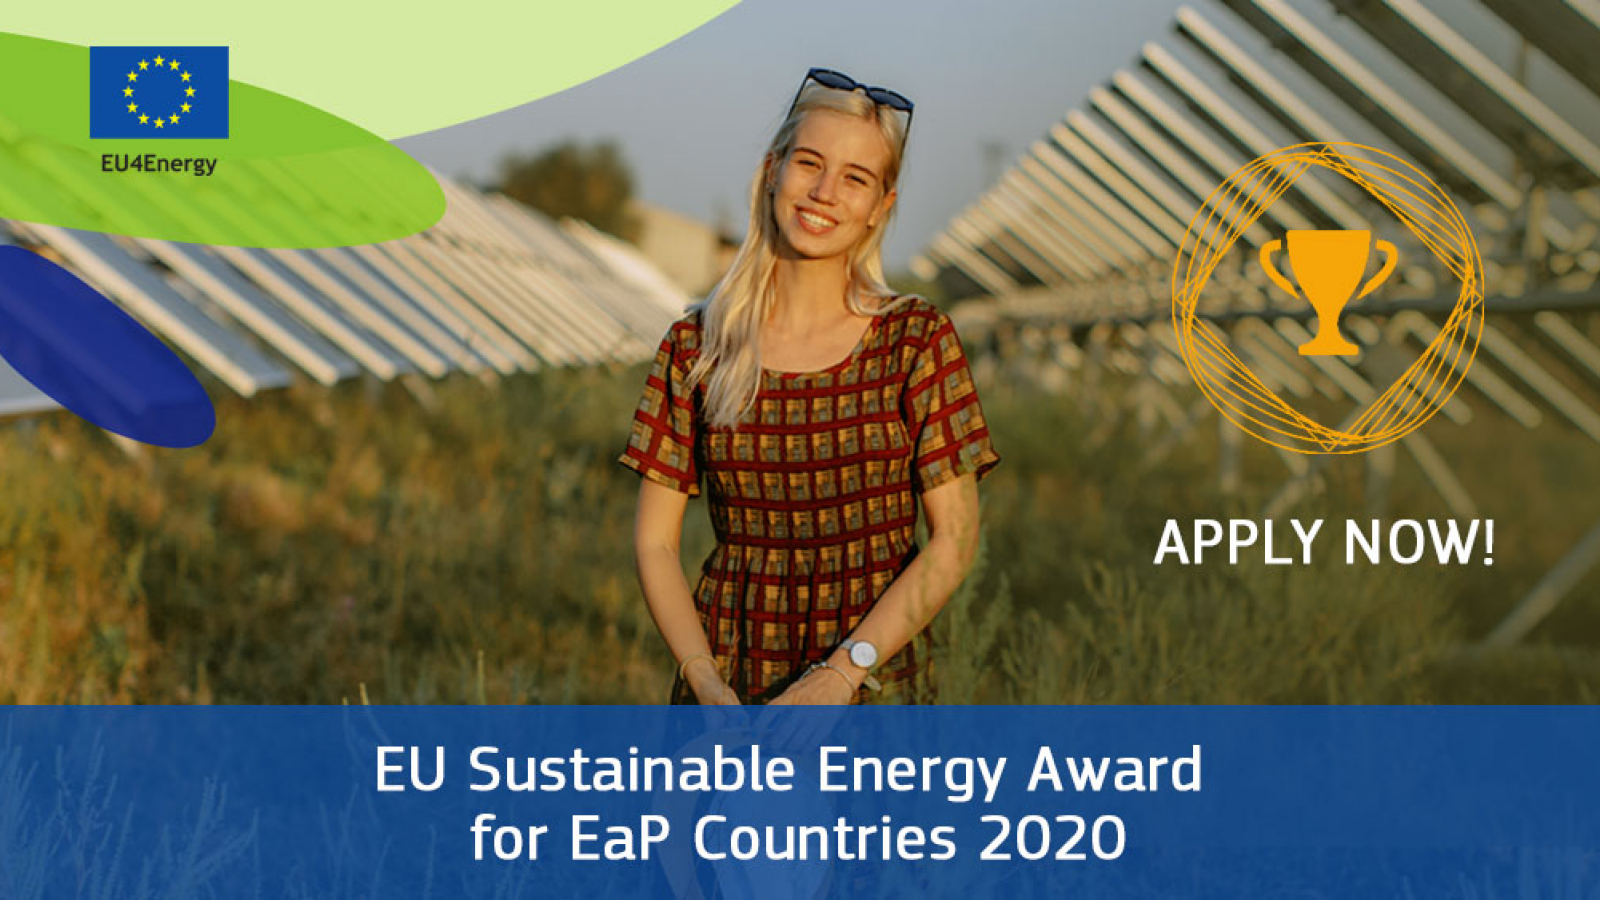 The 2020 edition of the EU Sustainable Energy Award for the Eastern Partnership is now open for applications!